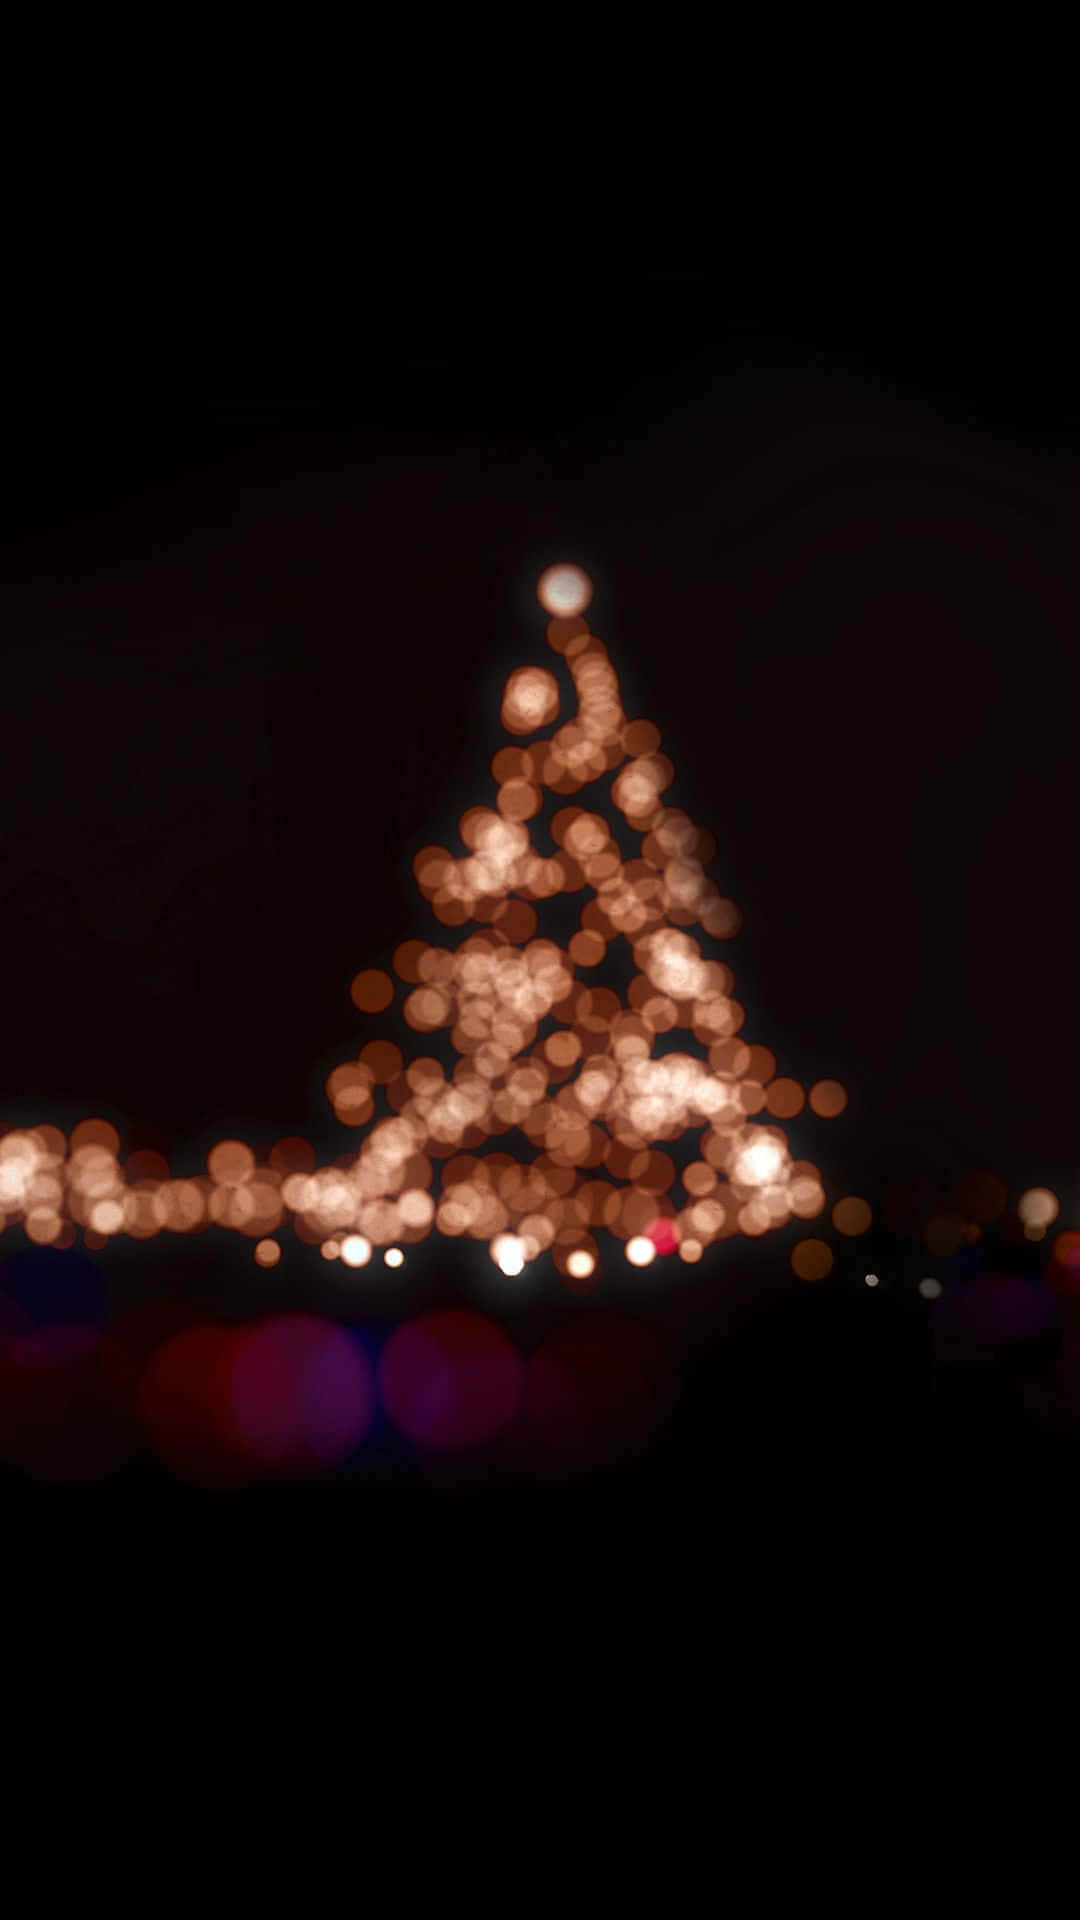 Blurry Christmas Tree Holiday iPhone Wallpaper